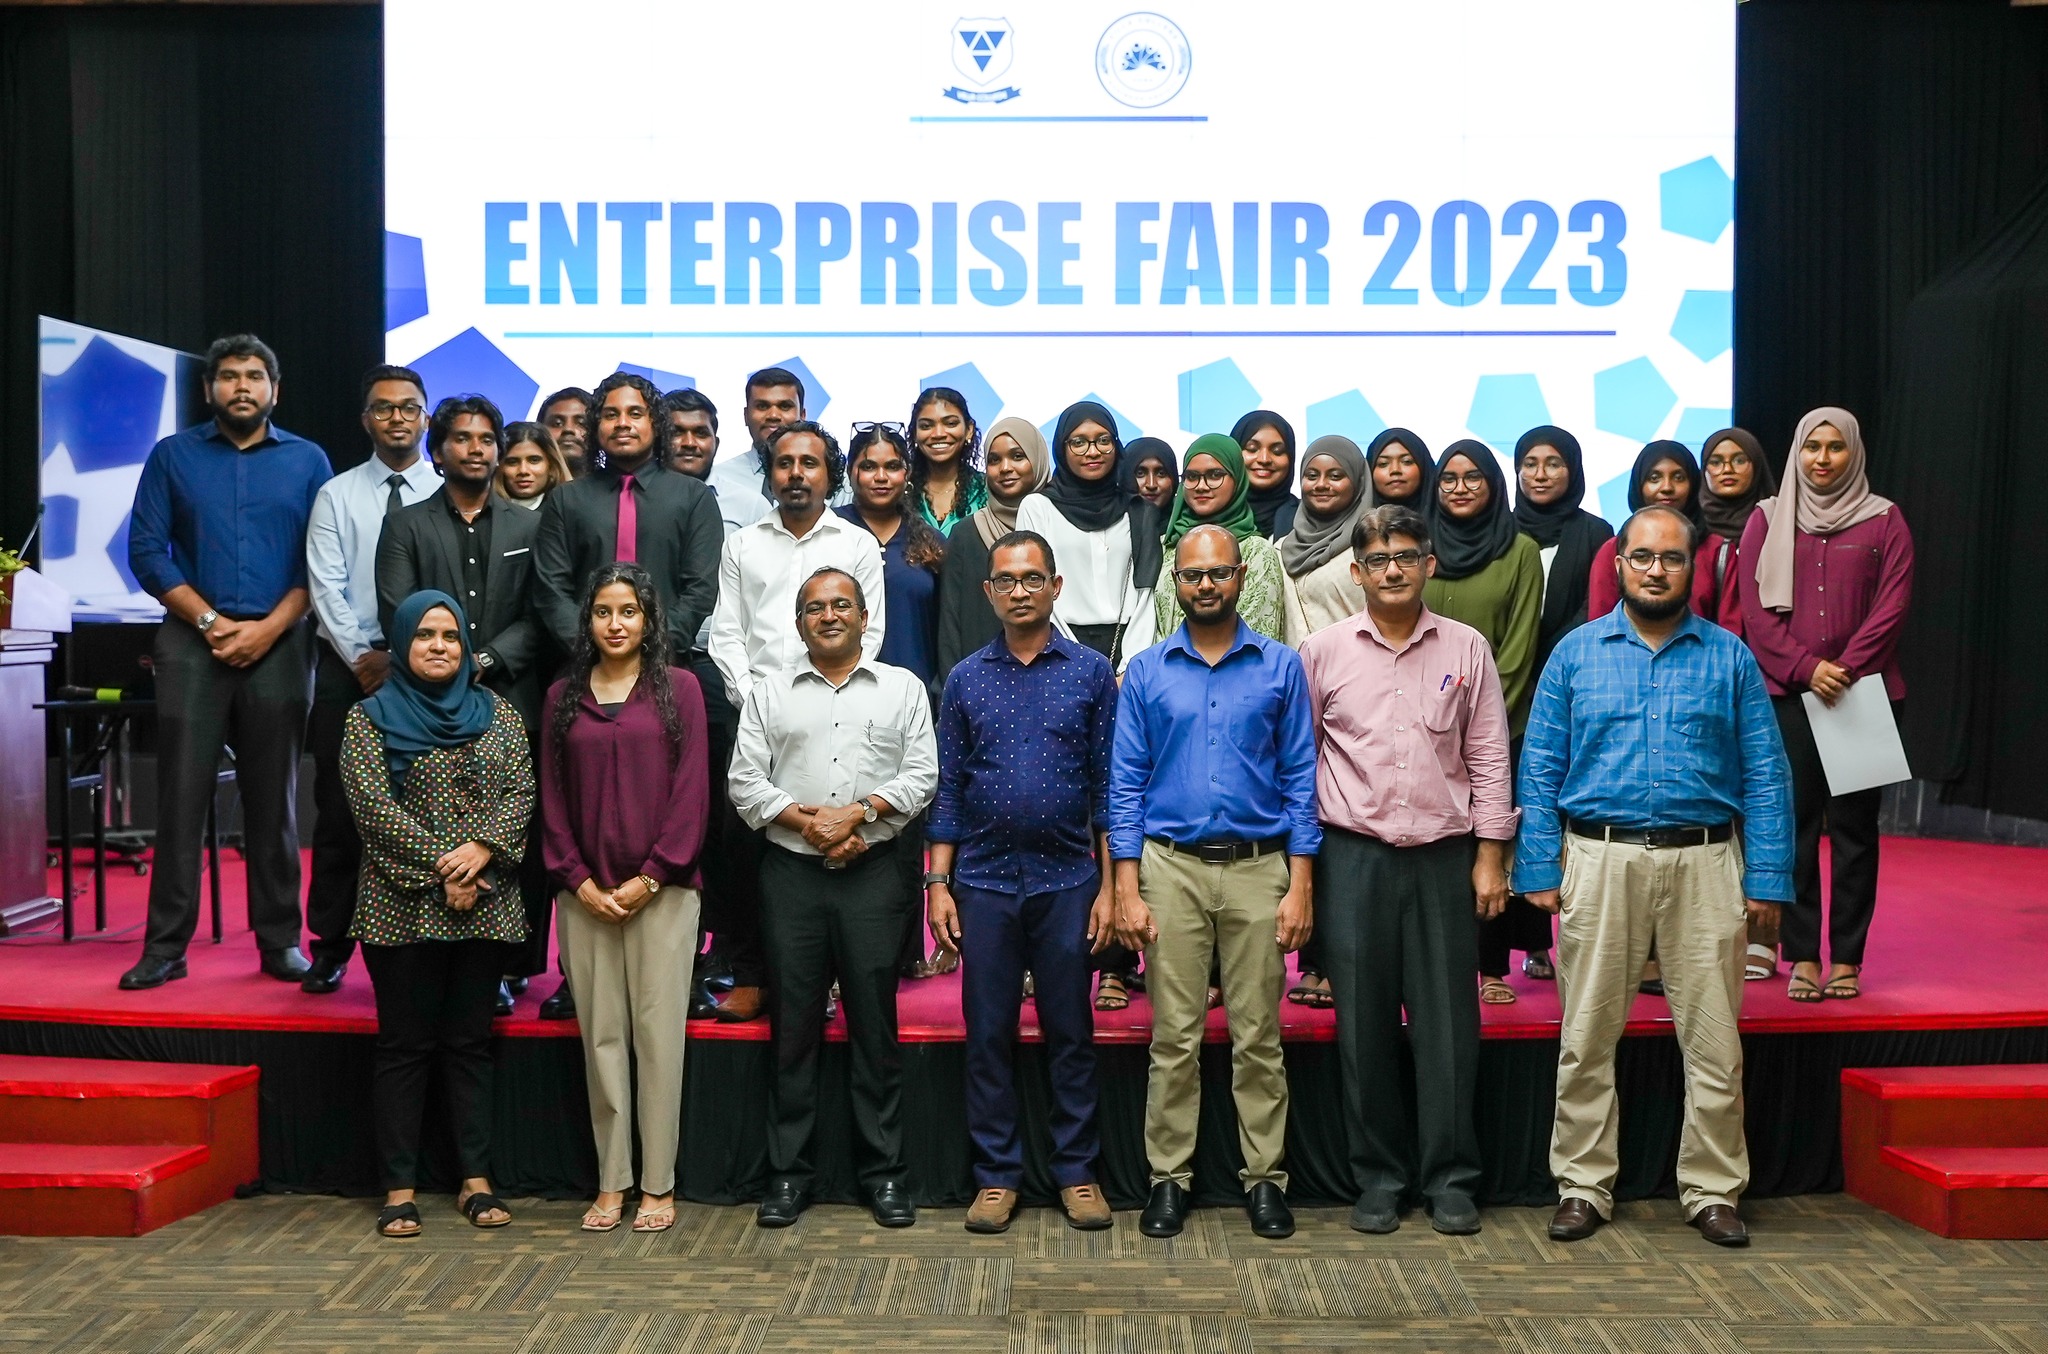 VILLA COLLEGE HOLDS AN ENTERPRISE FAIR FOR THE STUDENTS OF THE FACULTY OF BUSINESS MANAGEMENT